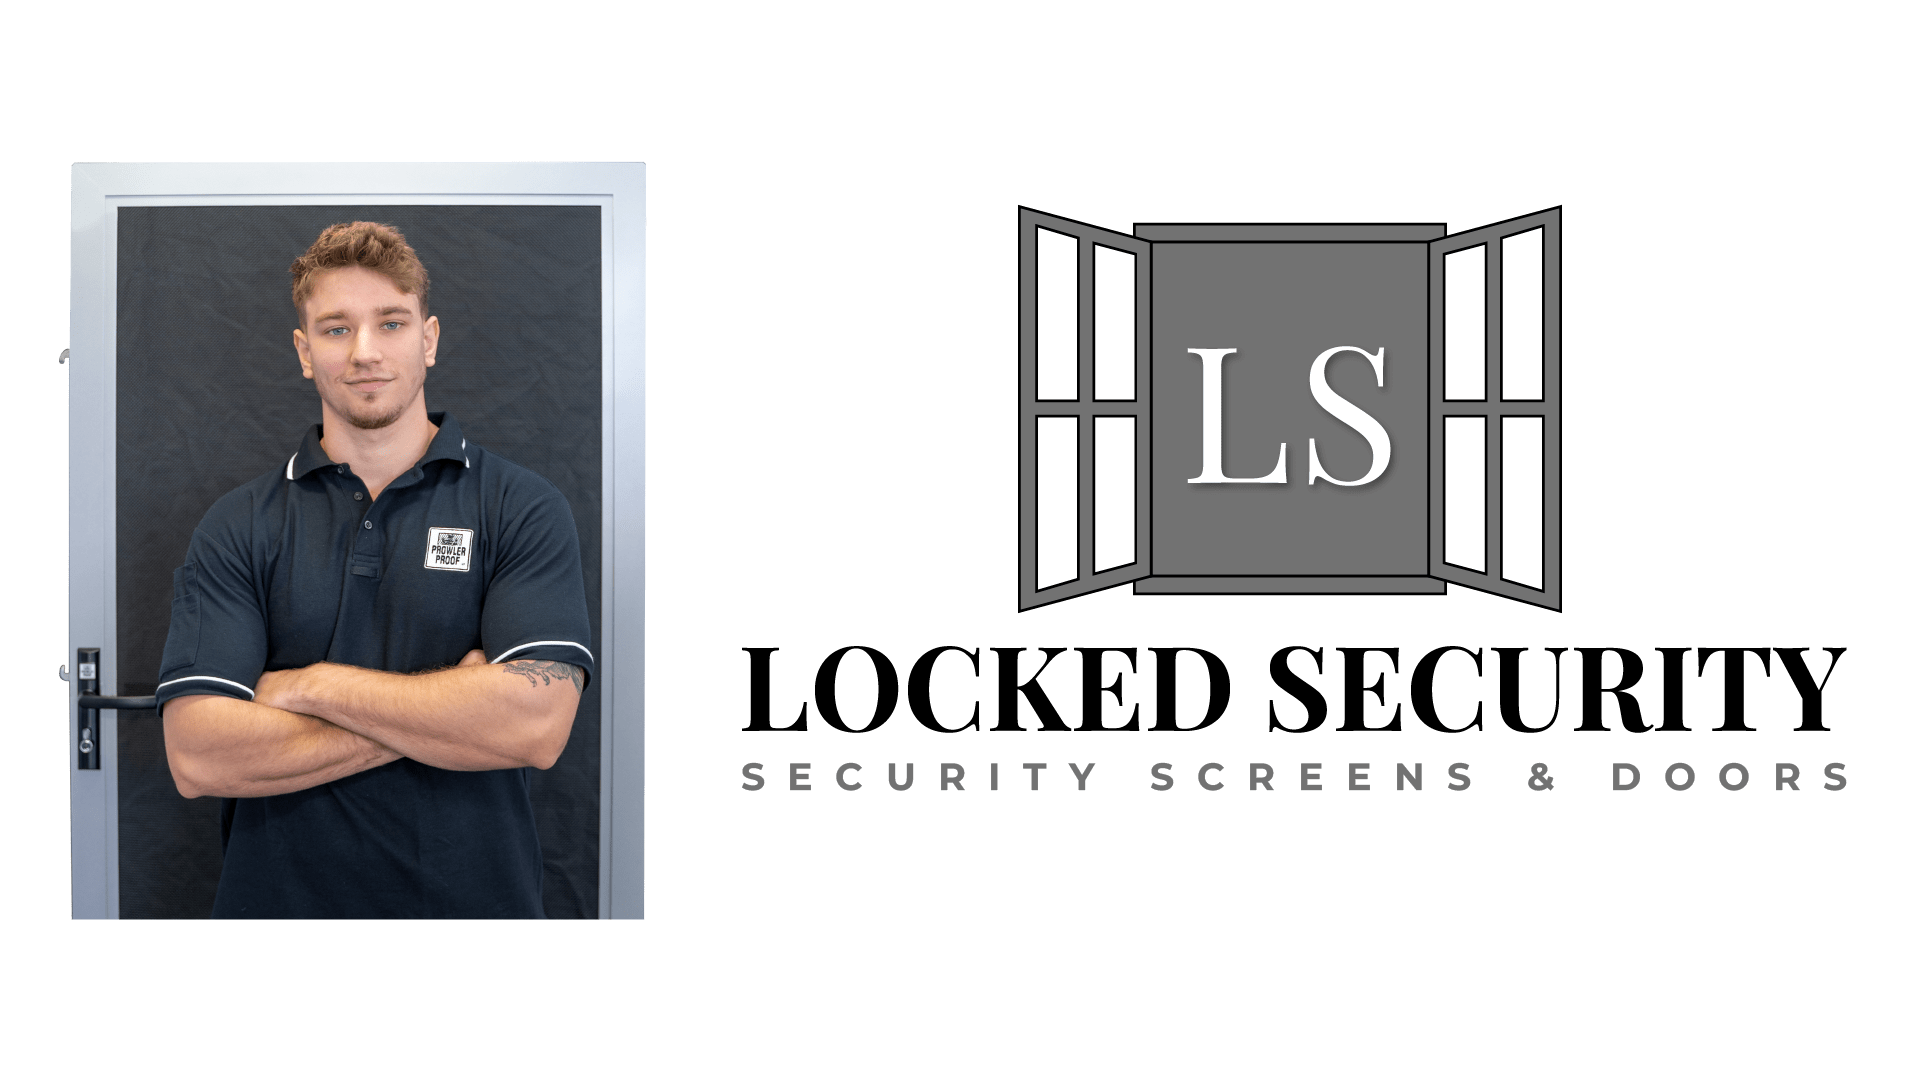 Locked Security info and Logo, certified Prowler Proof security screen installer